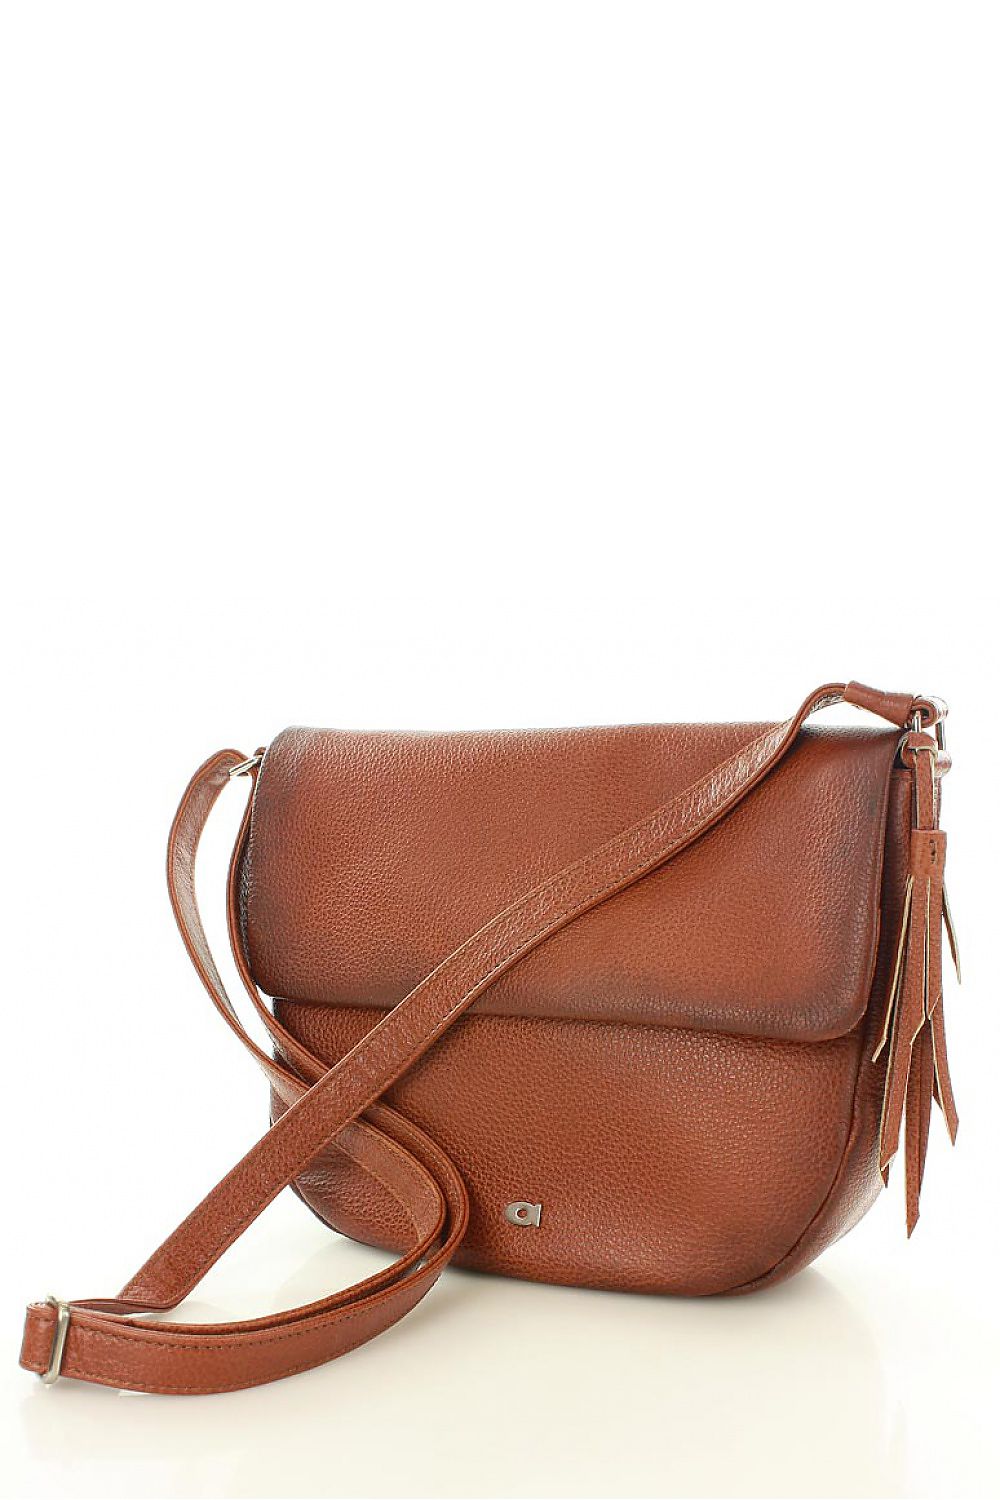 The Vintage Shop | Genuine Leather Bags for men & women online India